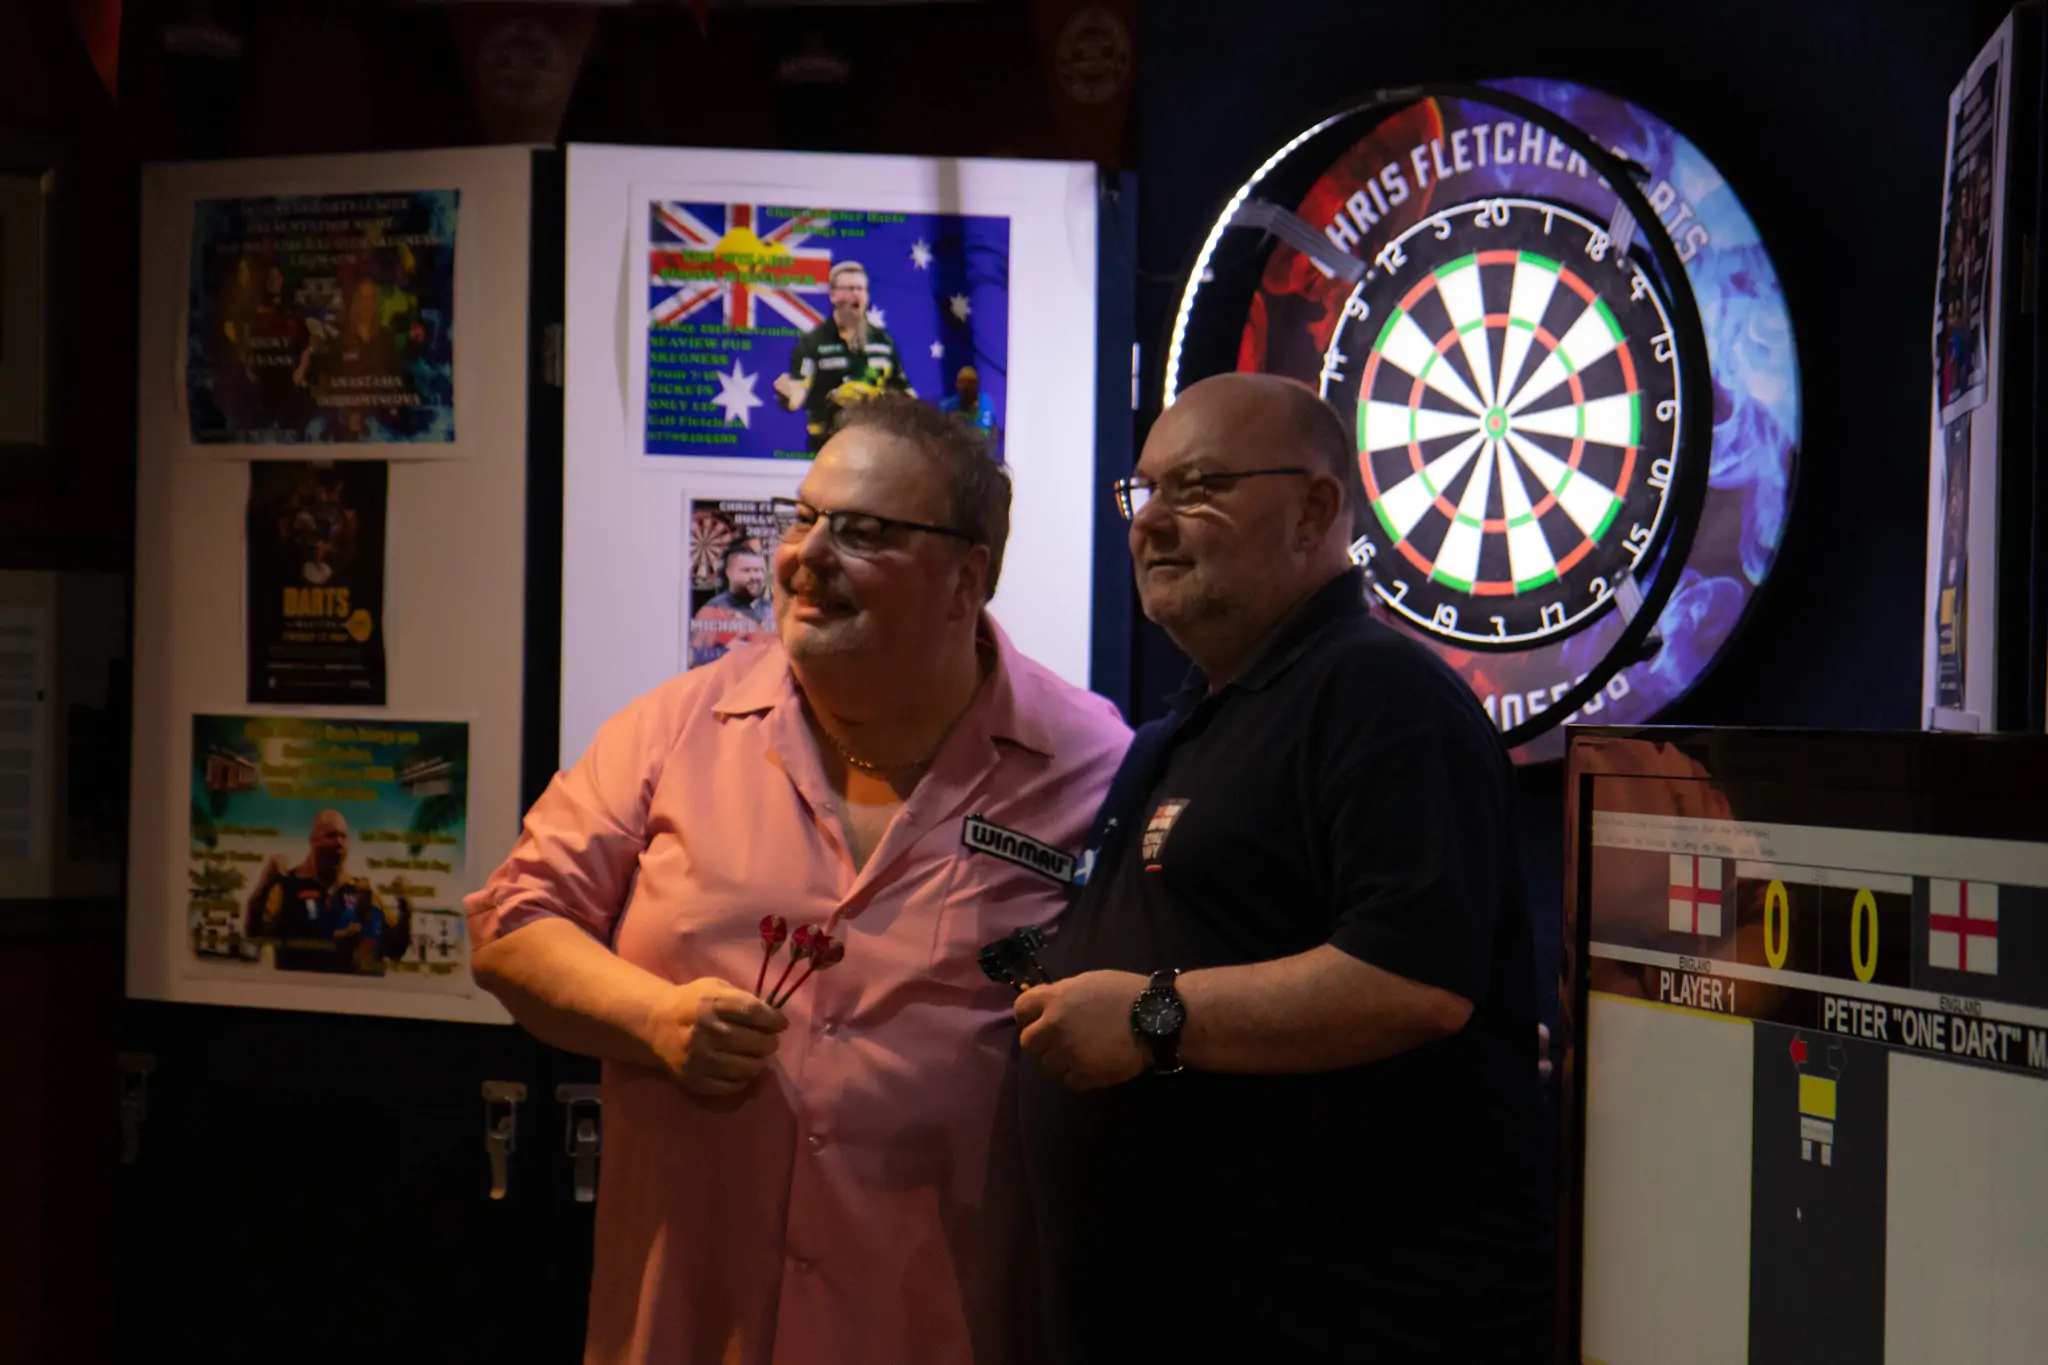 Peter Manley Pro Darts Player at the Batemans 150th anniversary celebrations darts with one of the competitors.